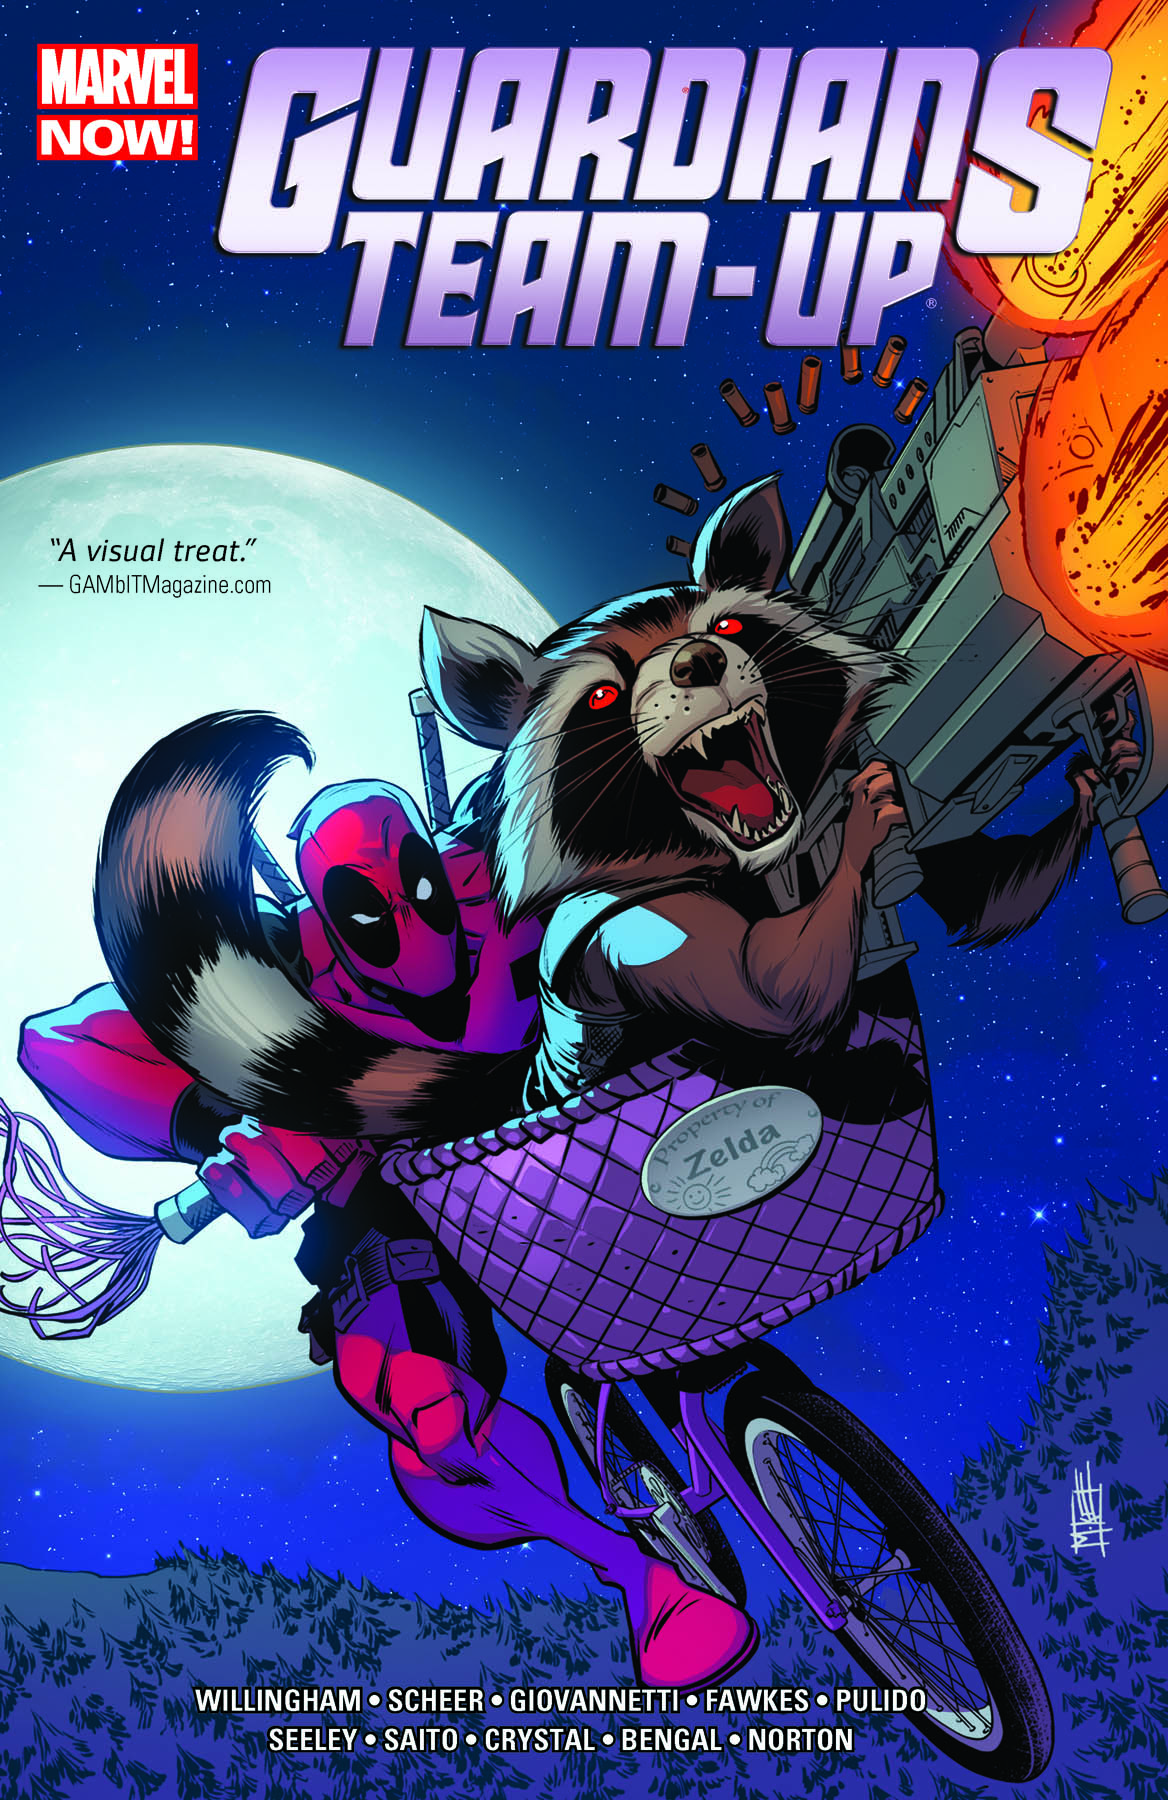 GUARDIANS TEAM-UP VOL. 2: UNLIKELY STORY TPB (Trade Paperback)